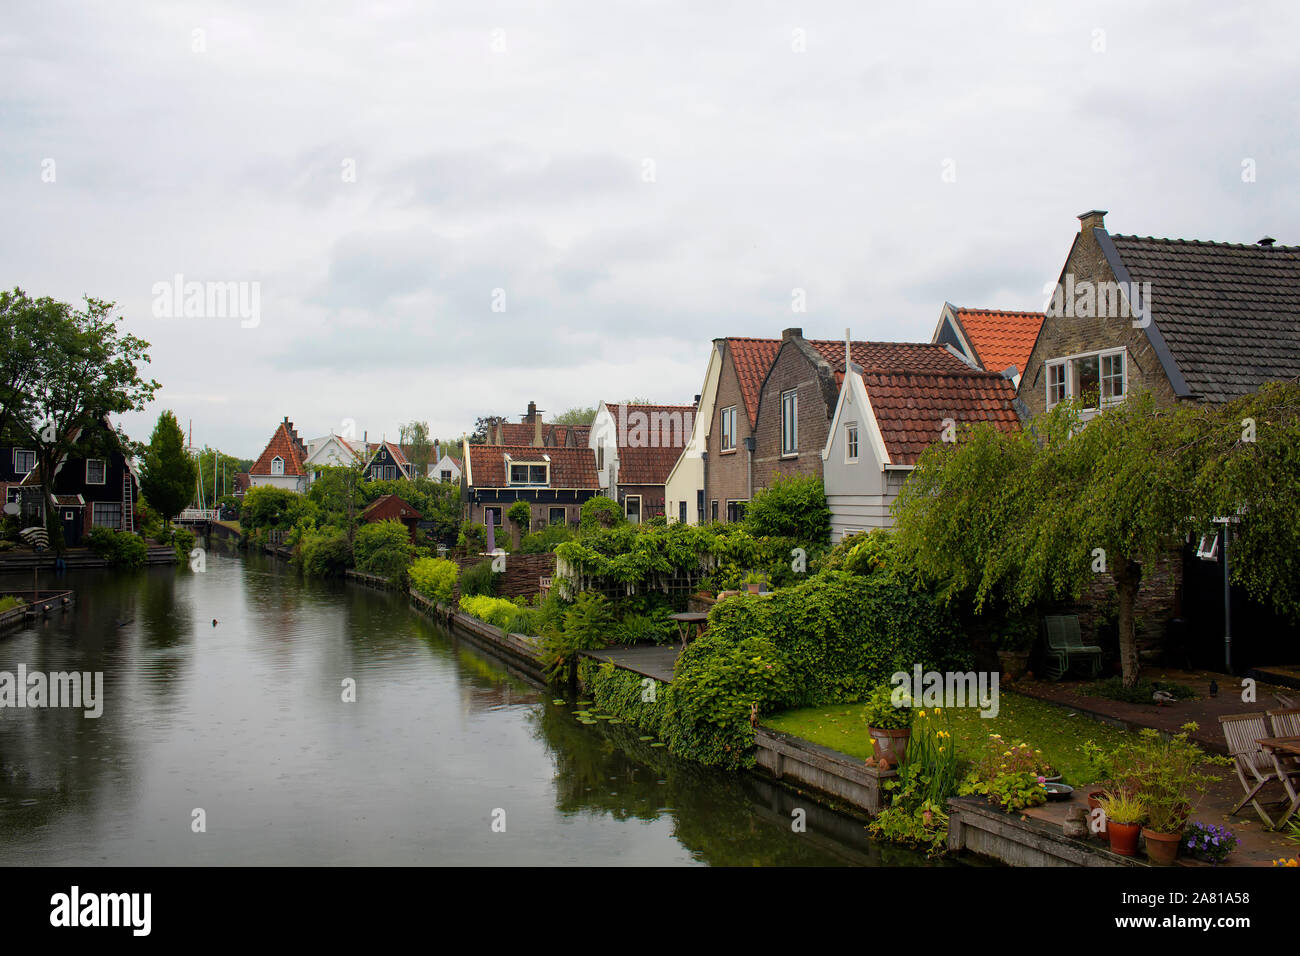 View of traditional houses, trees, plants and canal in Edam. It is a town famous for its semi hard cheese in the northwest Netherlands, in the provinc Stock Photo